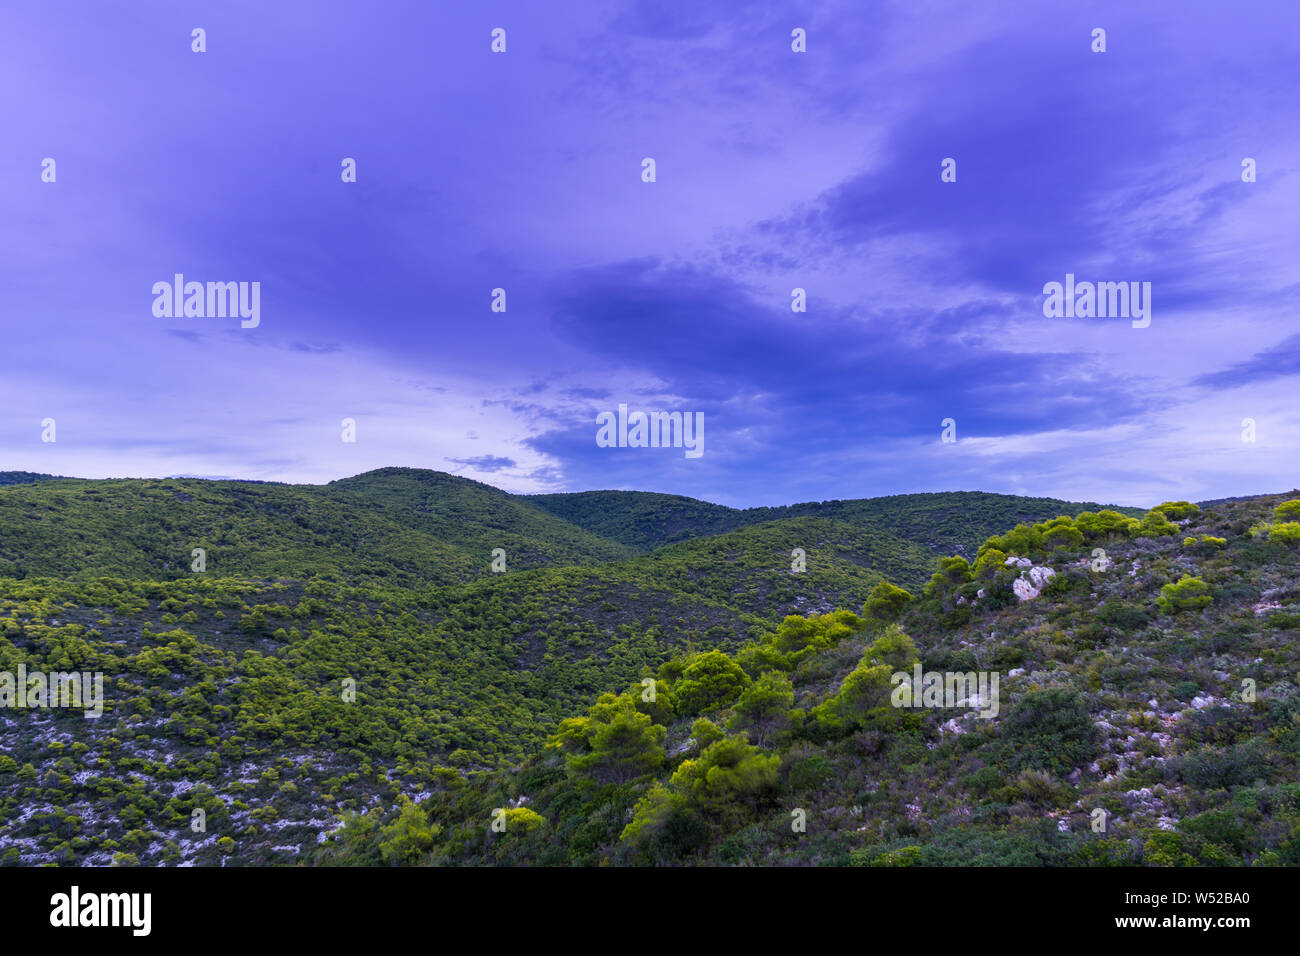 Greece, Zakynthos, Mountain landscape and untouched nature in magical twilight after sunset Stock Photo